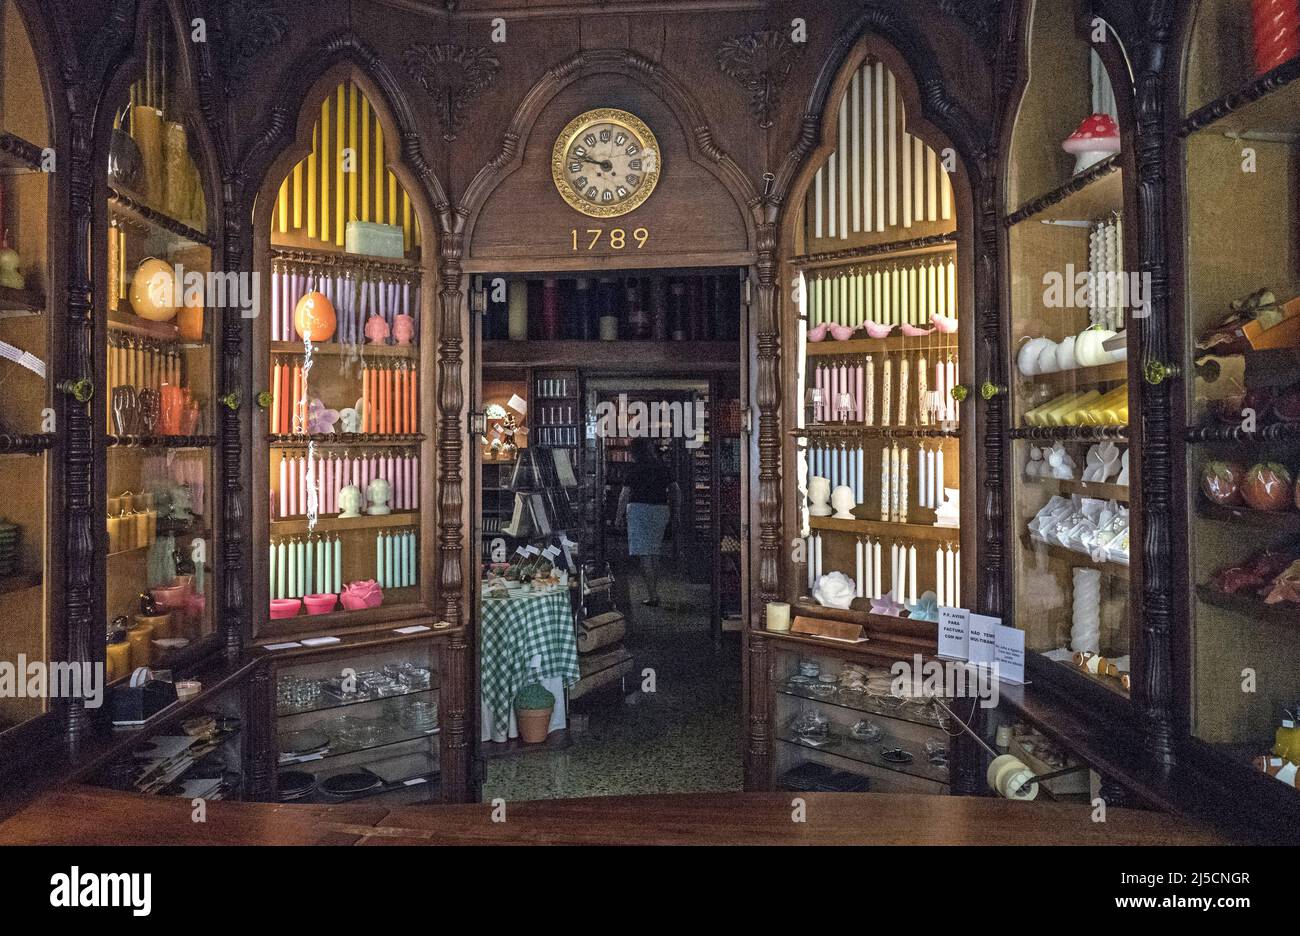 Portugal, Lisbon, 01.07.2019. The candle shop Caza das Vellas Loreto is one of the oldest shops in Lisbon on 01.07.2019. The shop was opened in 1789 and the exterior of the store has changed little since it opened. It has been owned by the same family for seven generations. [automated translation] Stock Photo